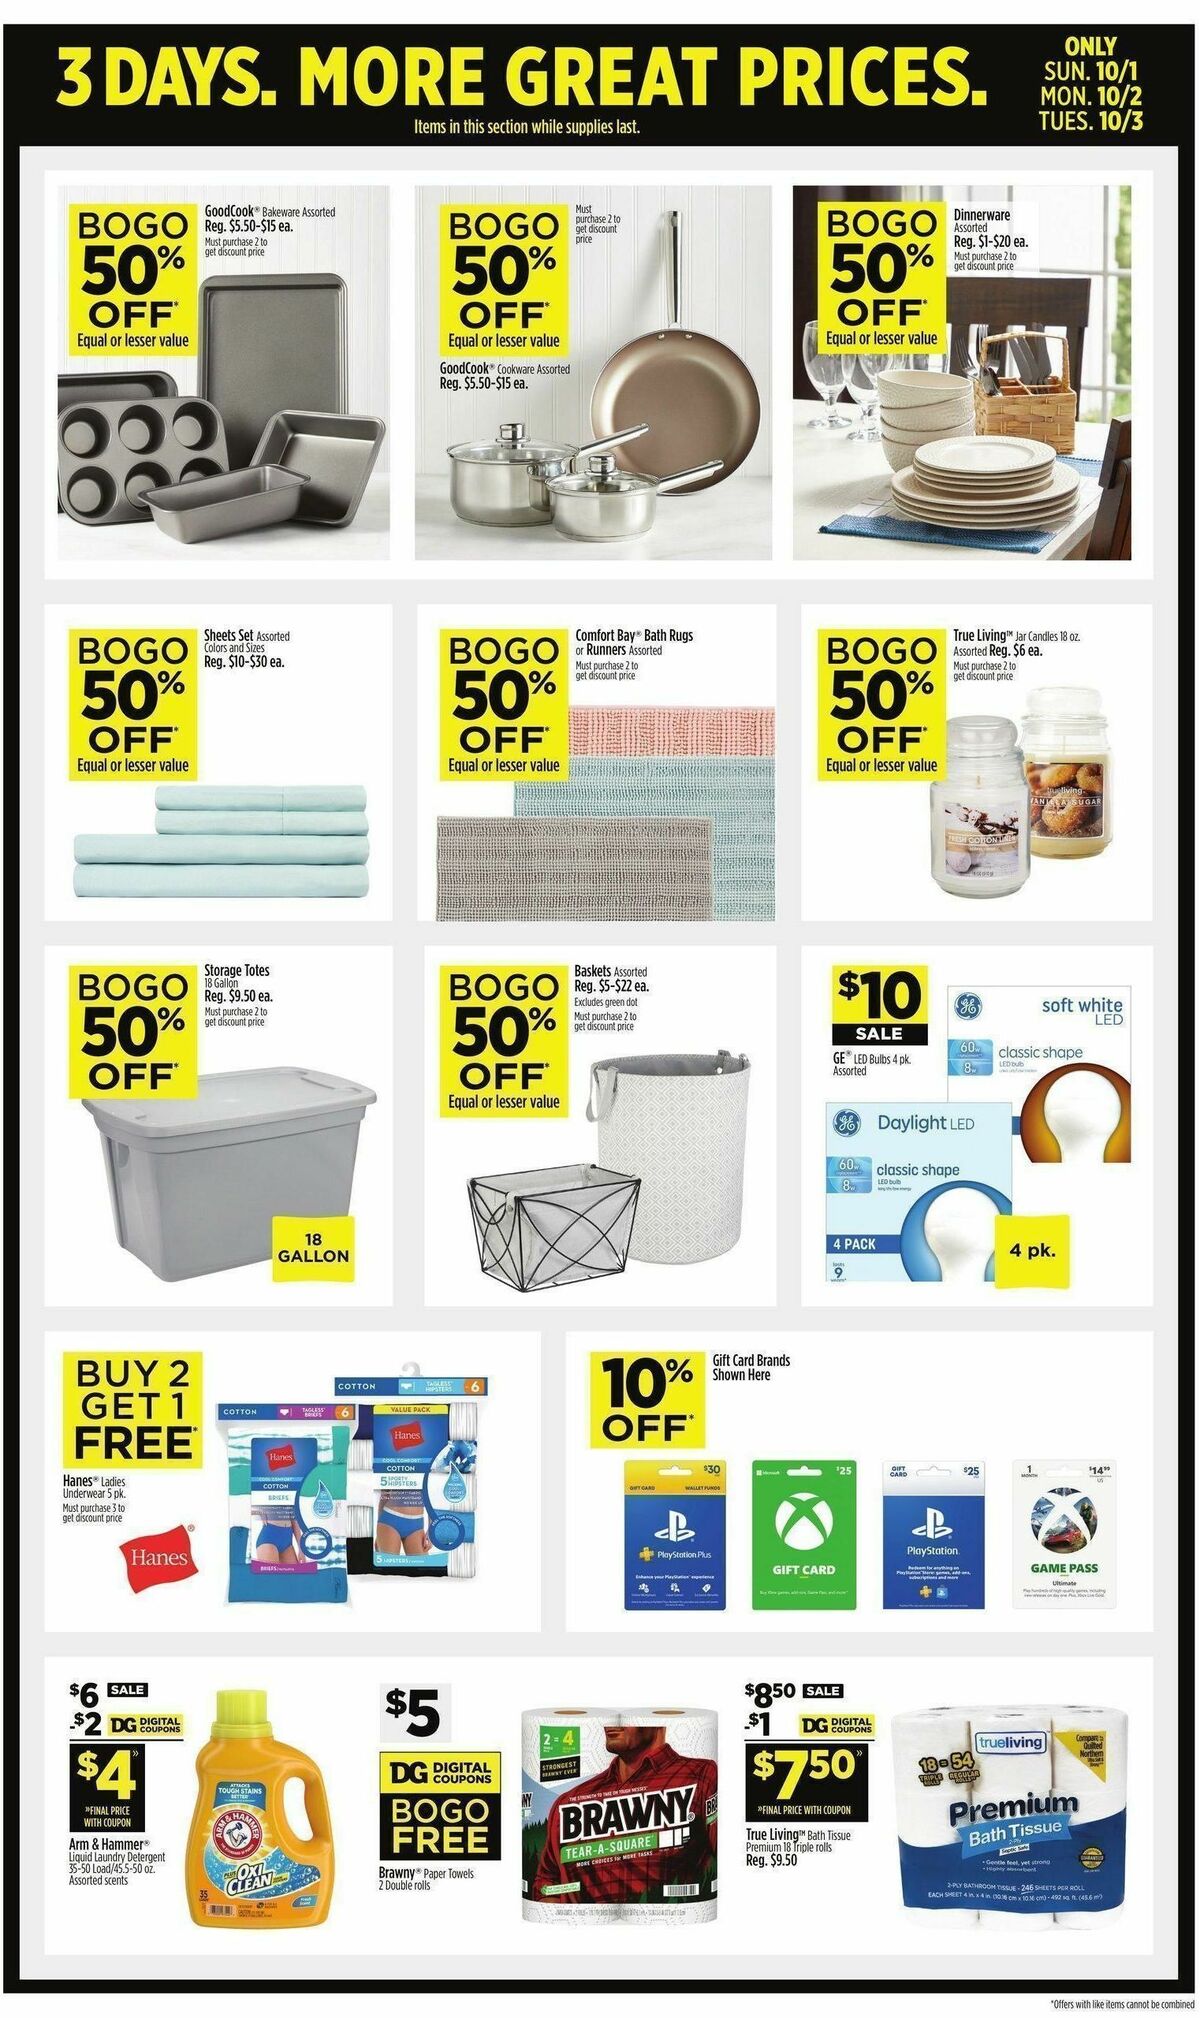 Dollar General Weekly Ad from October 1